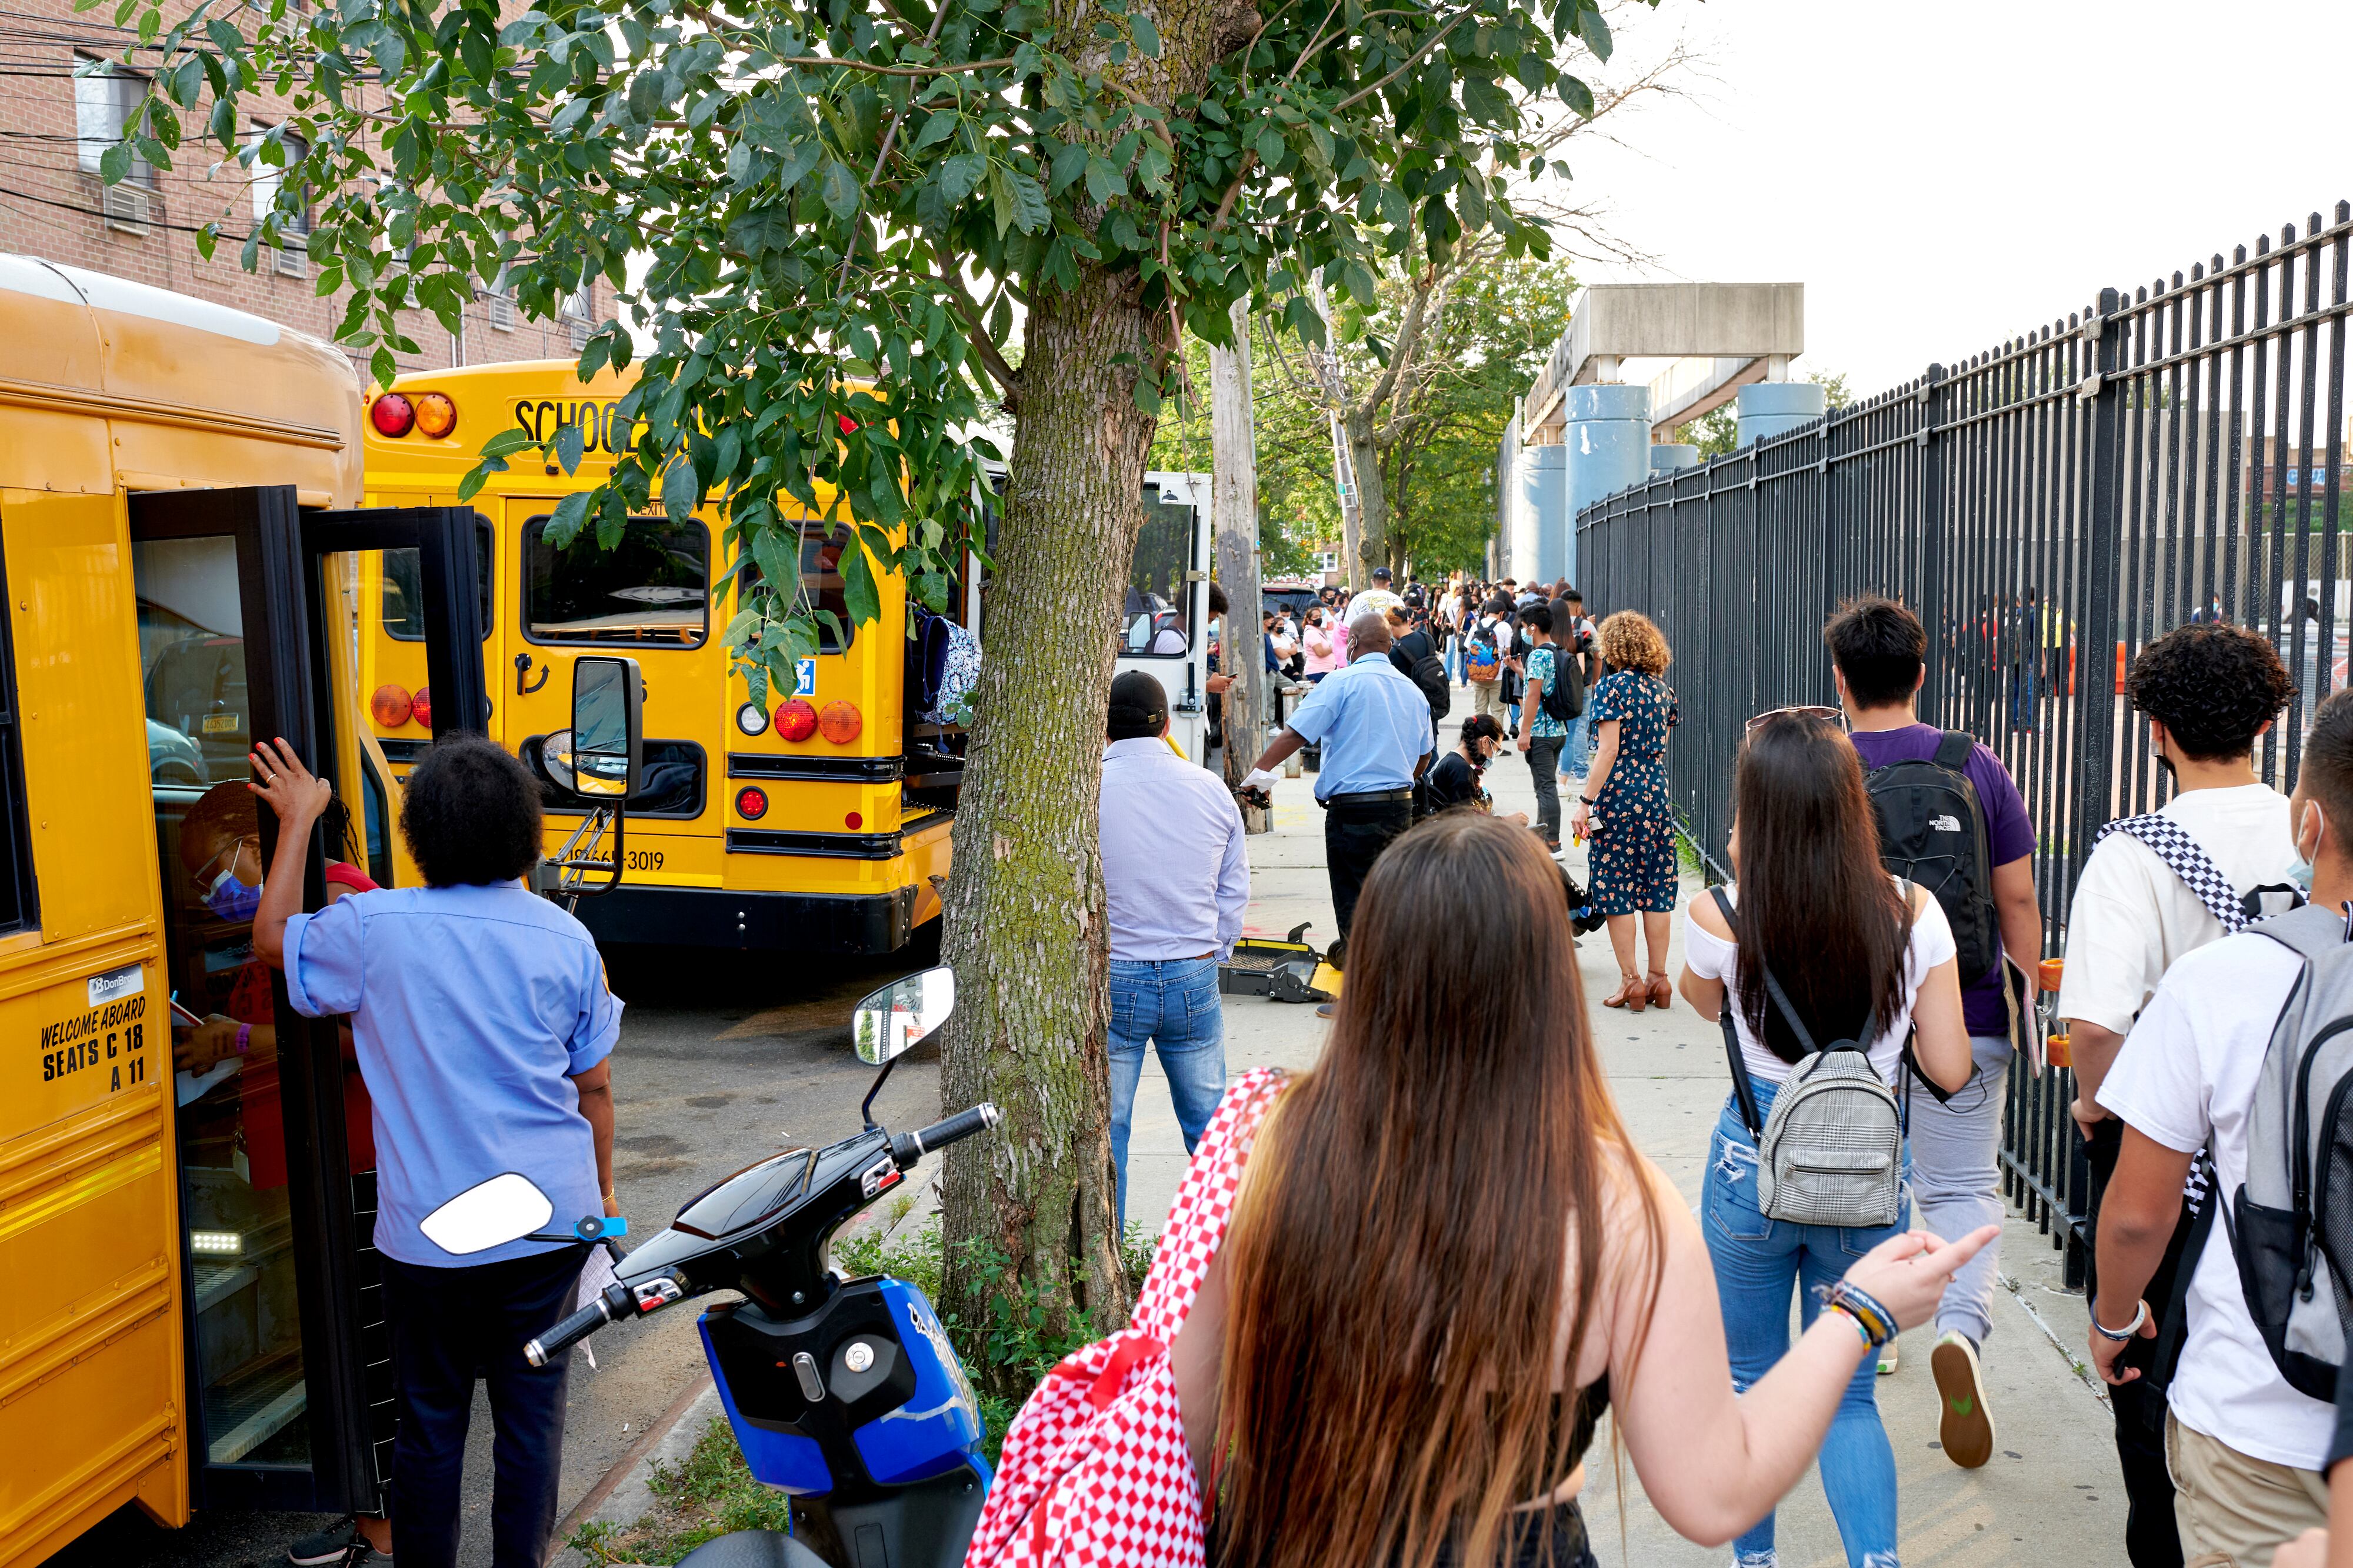 A group of students wearing backpacks flanked by a fence and yellow school buses walk toward a school.